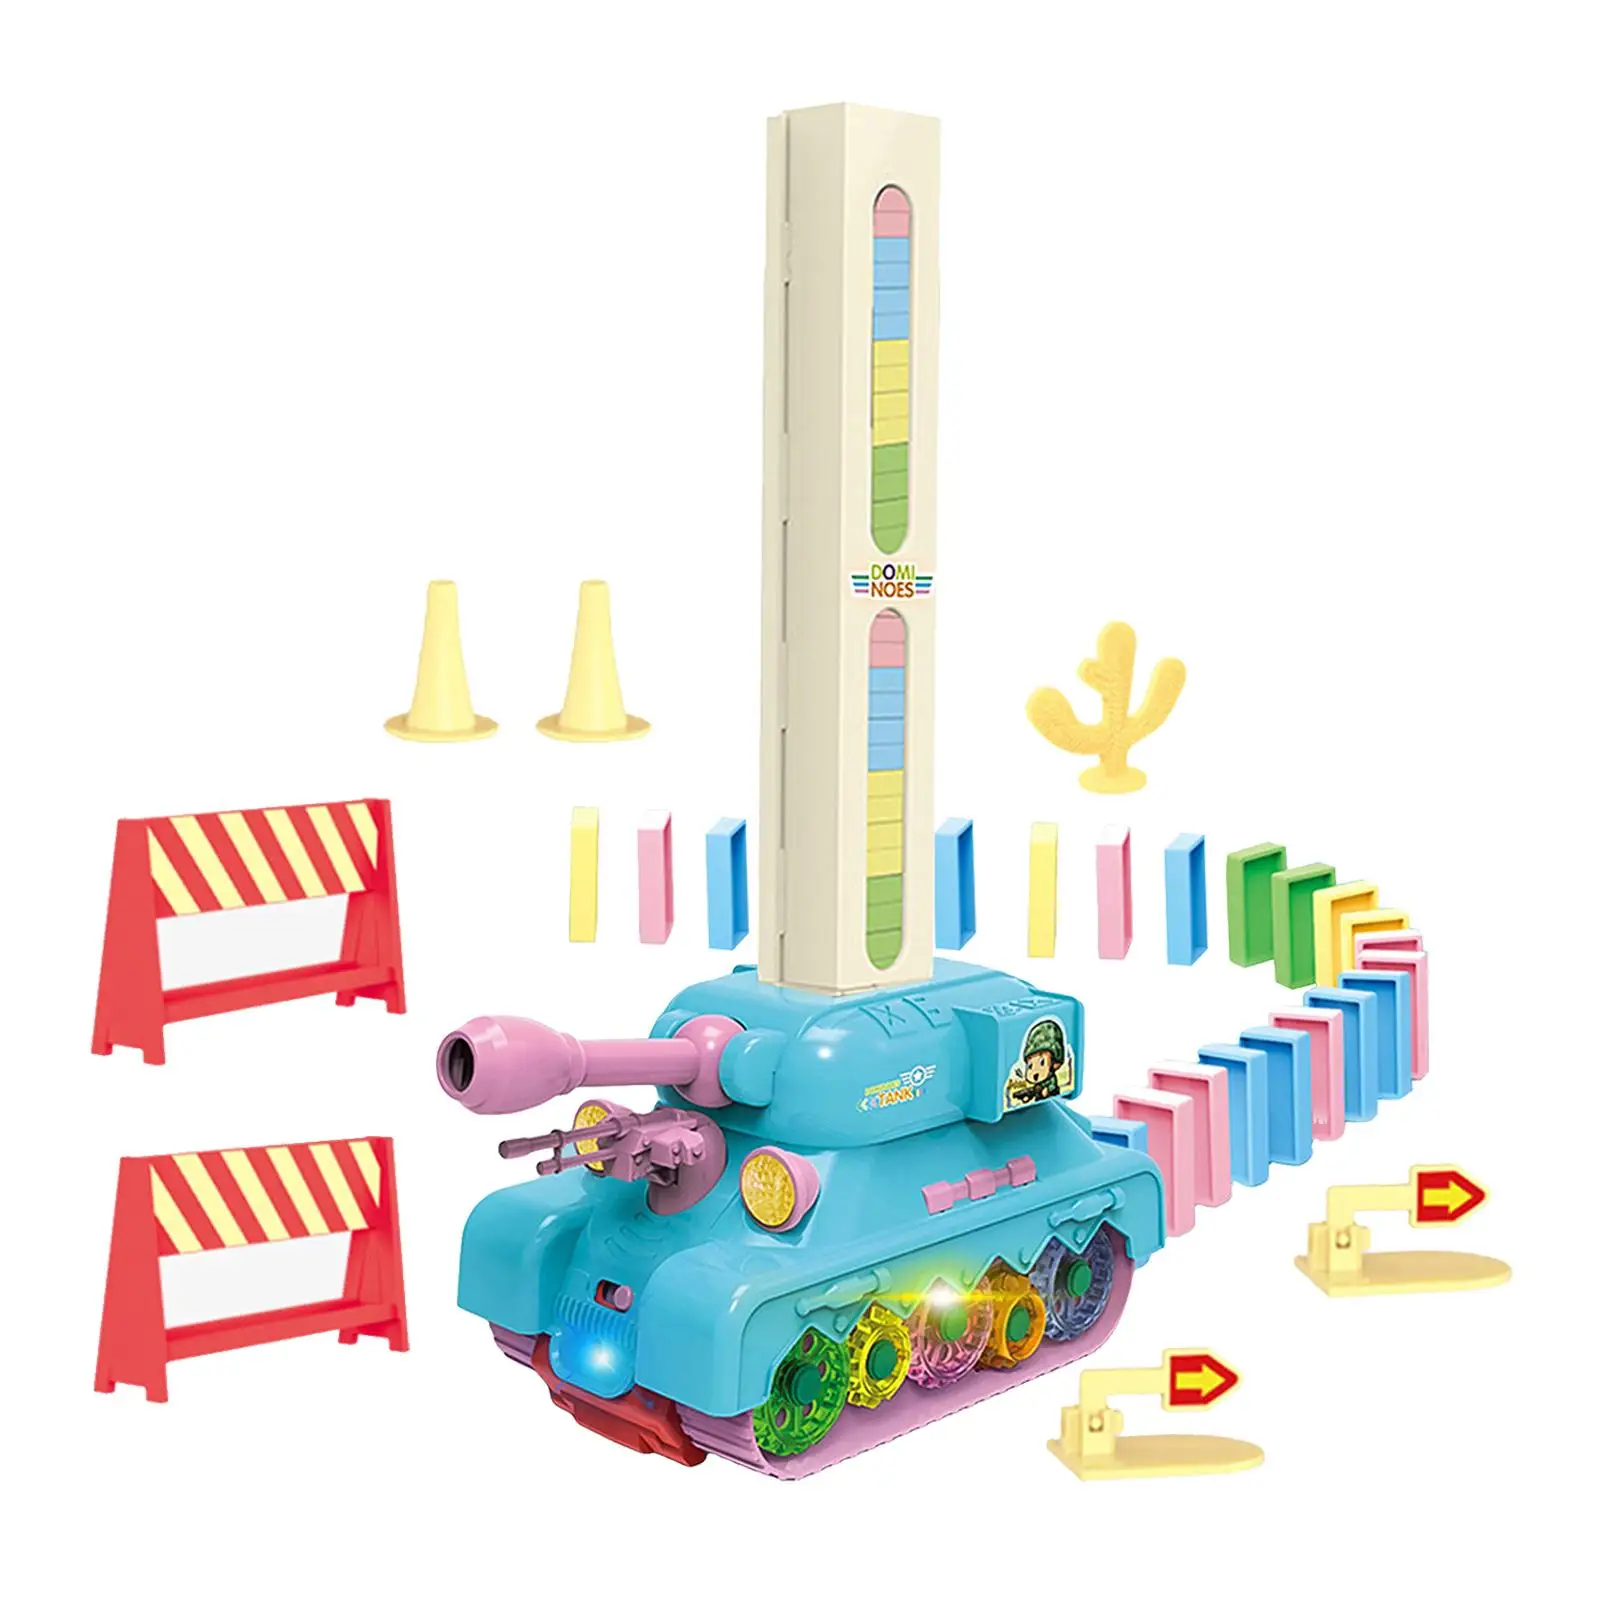 Laying Toy Tank Set Early Learning Education Toys for Girls Holiday Gifts